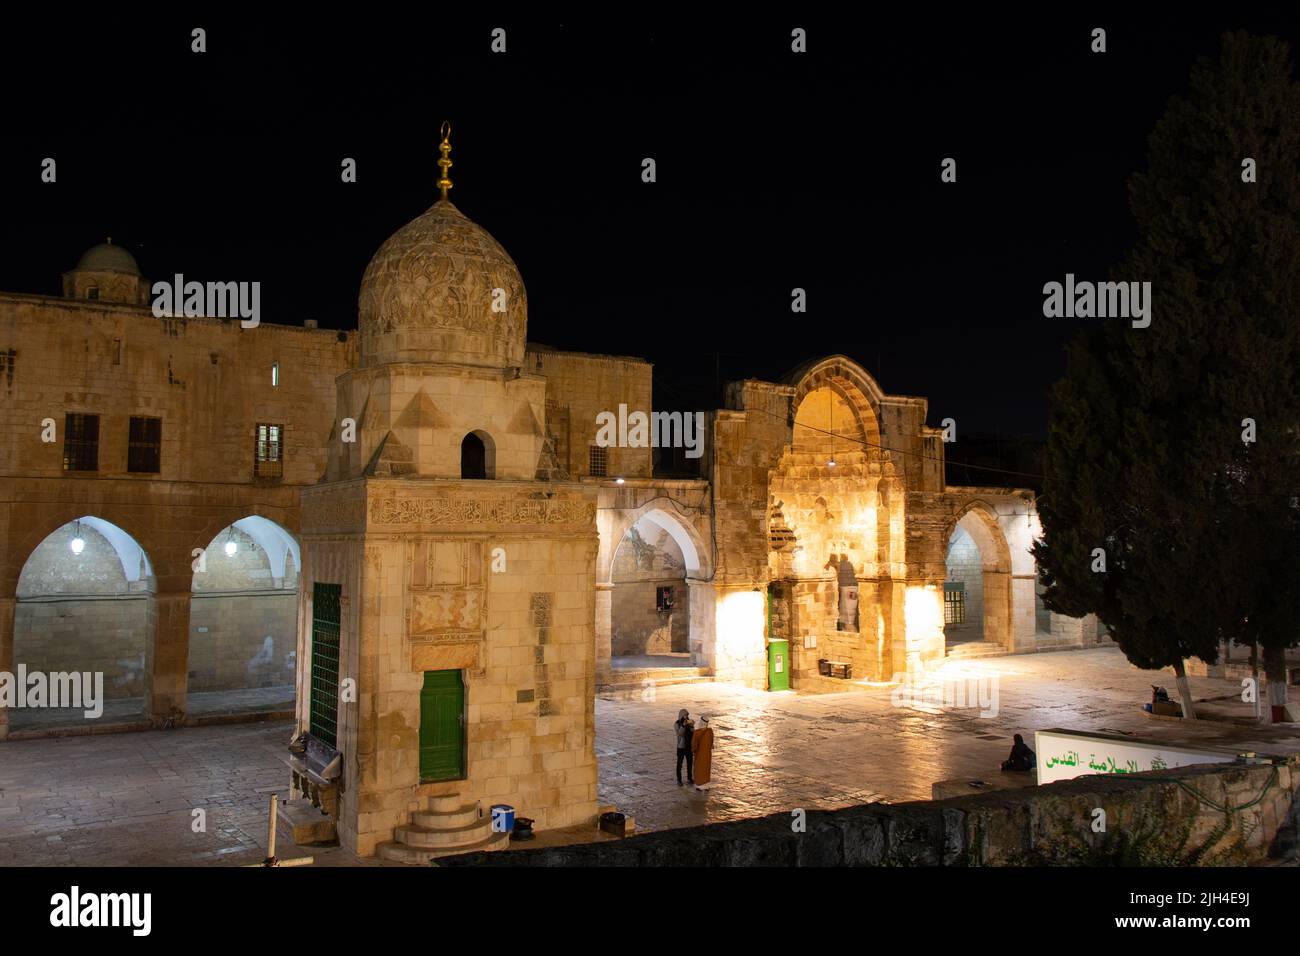 Fountain of Qaitbay and Cotton Merchants Gate or Bab al-Qattanin in Aqsa mosque. Night time in muslim quarter of Jerusalem city Stock Photo